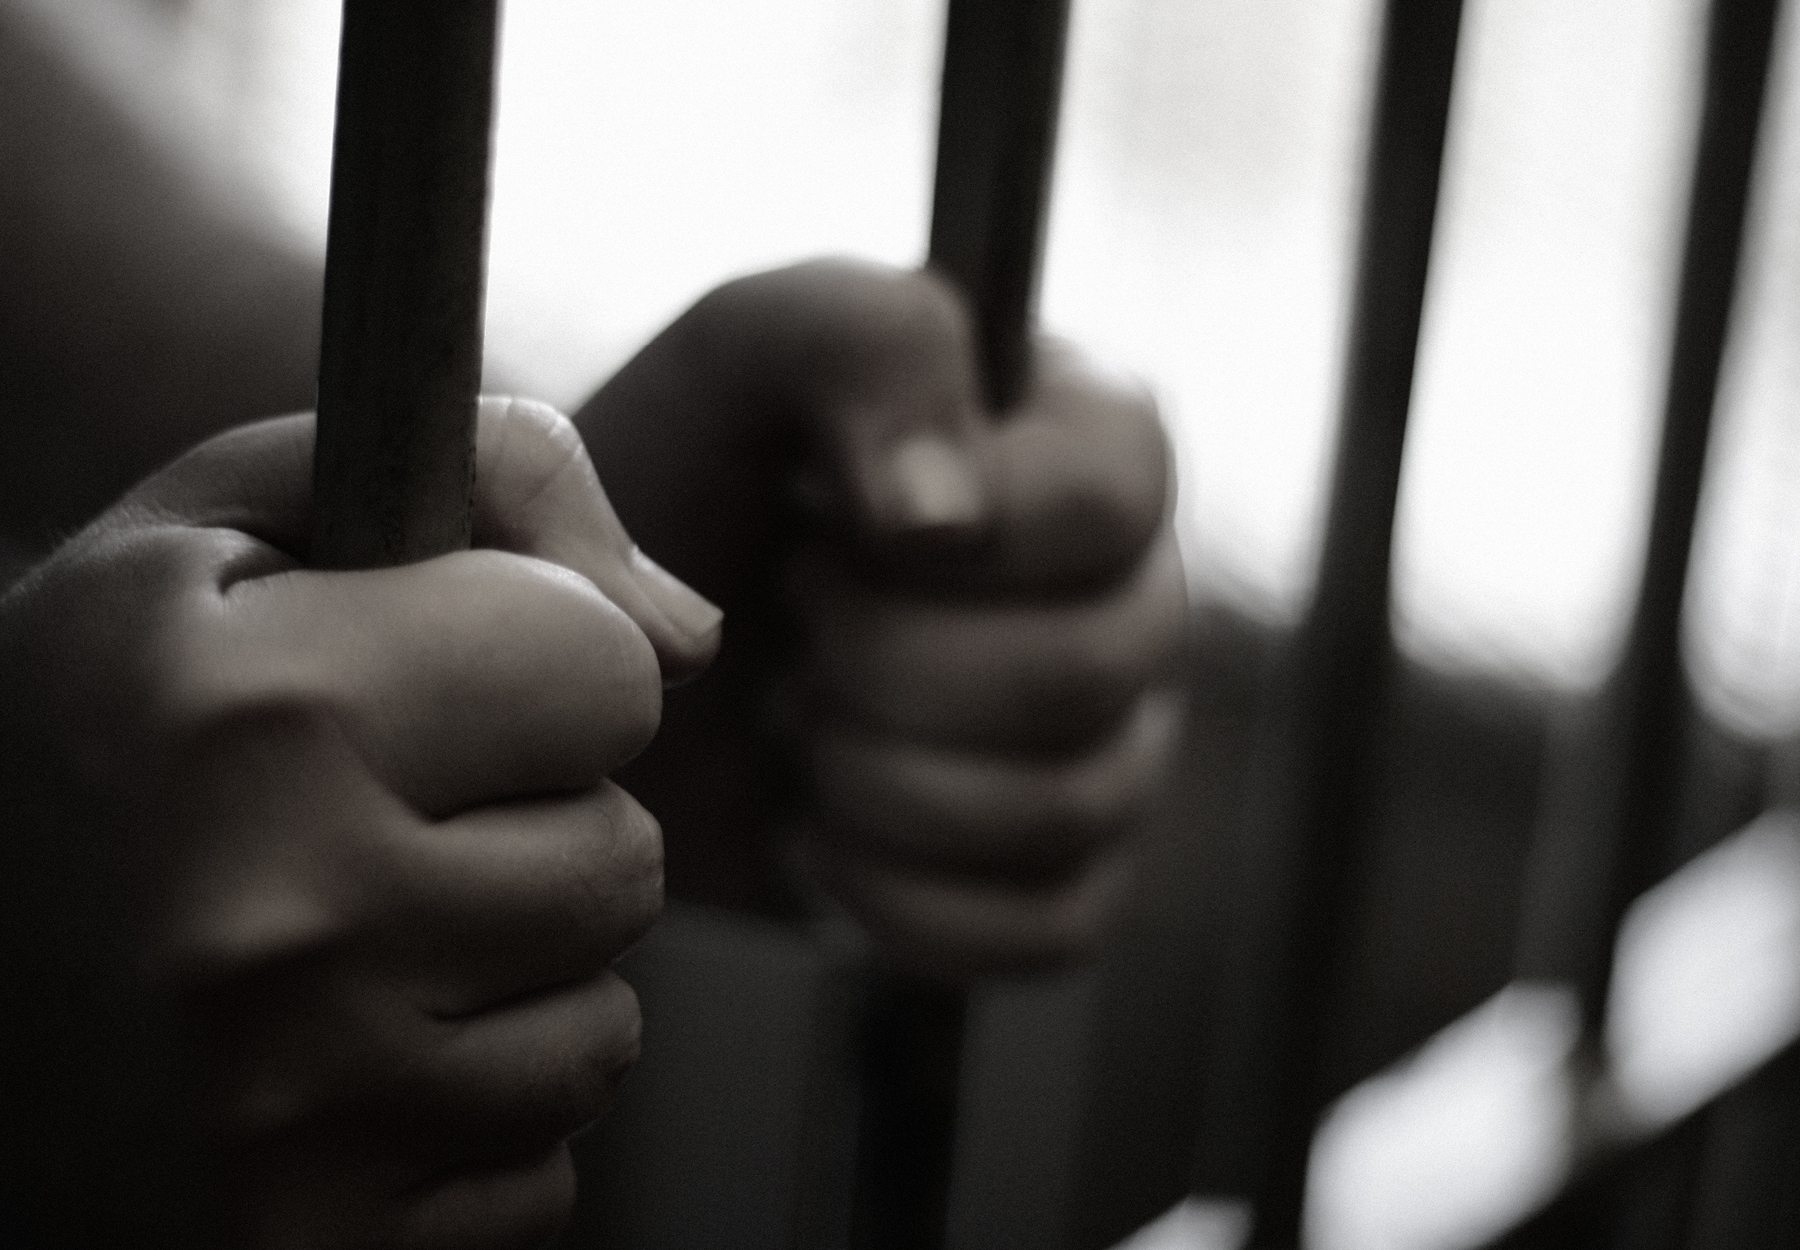 Black and white closeup photo of hands holding bars of a prison cell. Prison time concept. Stock image.